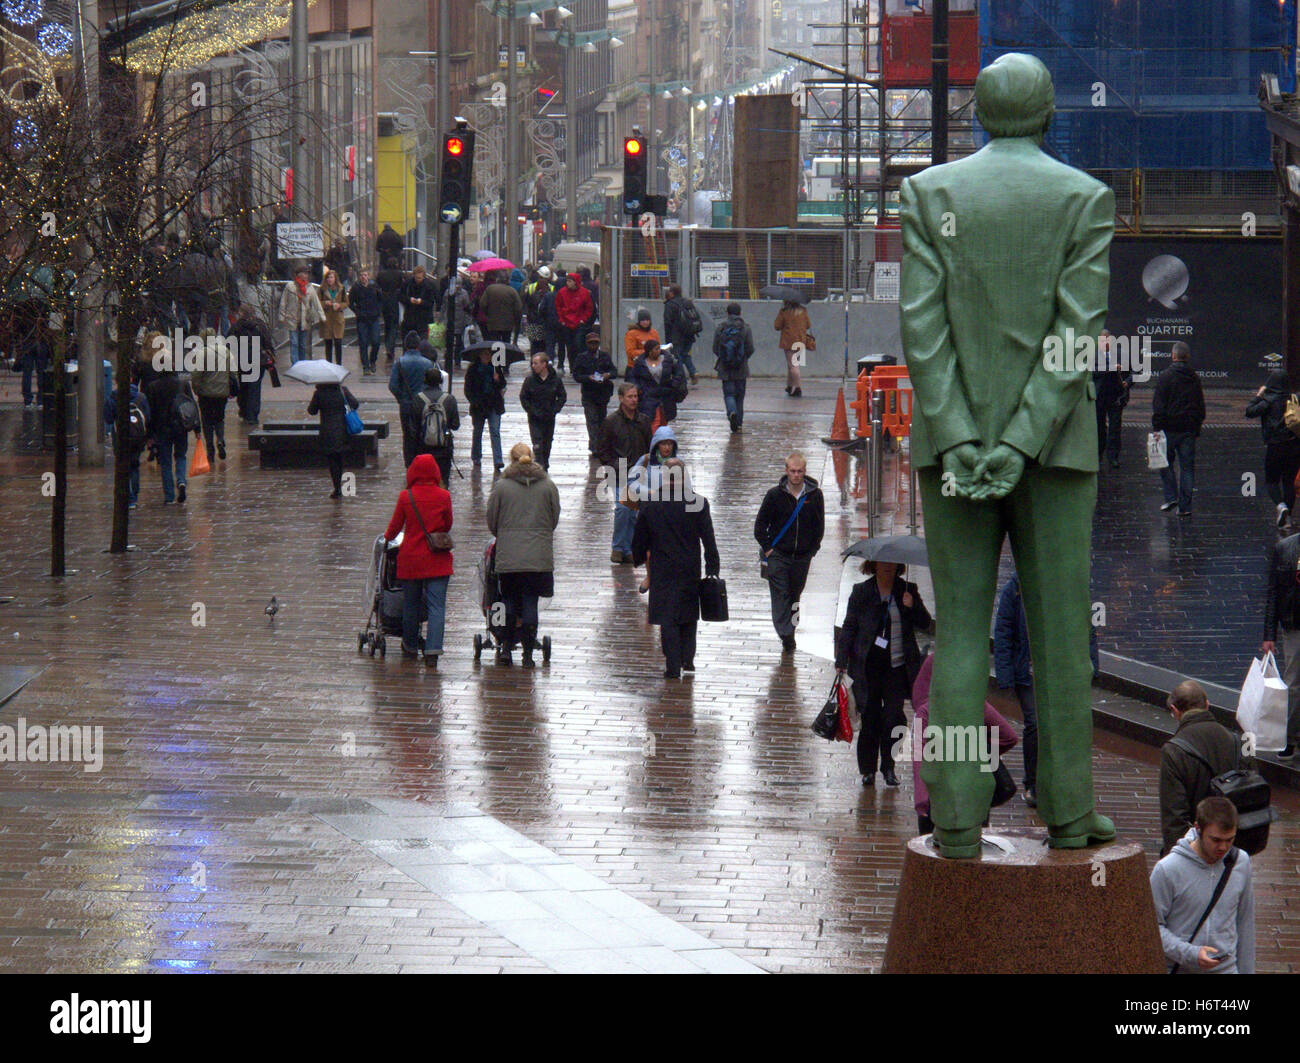 Glasgow in the rain wet streets and umbrella umbrellas shopping bags Stock Photo